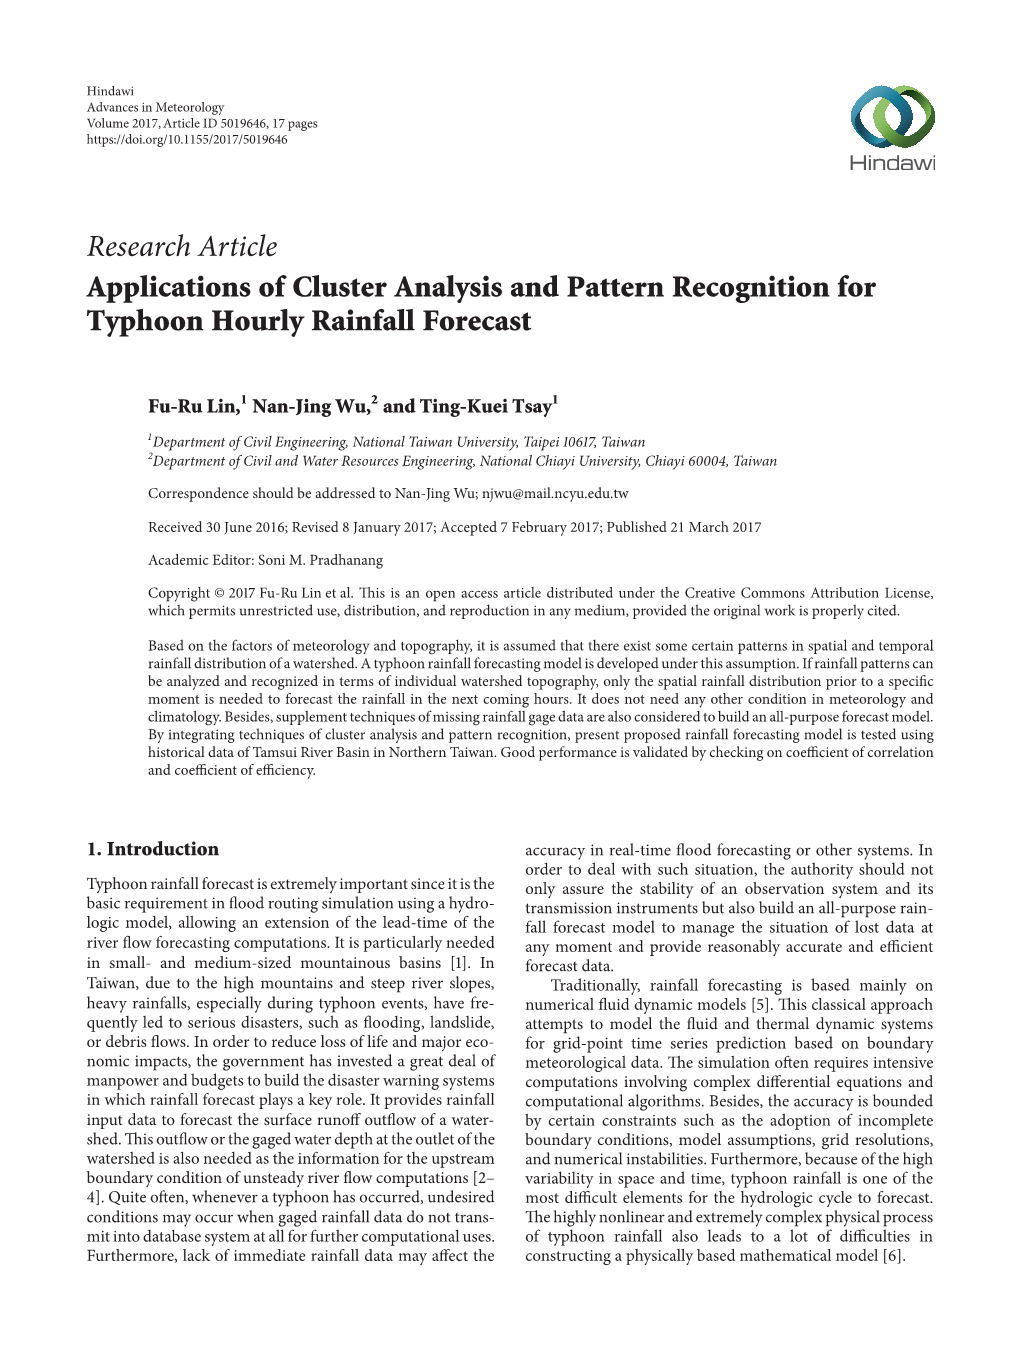 Research Article Applications of Cluster Analysis and Pattern Recognition for Typhoon Hourly Rainfall Forecast